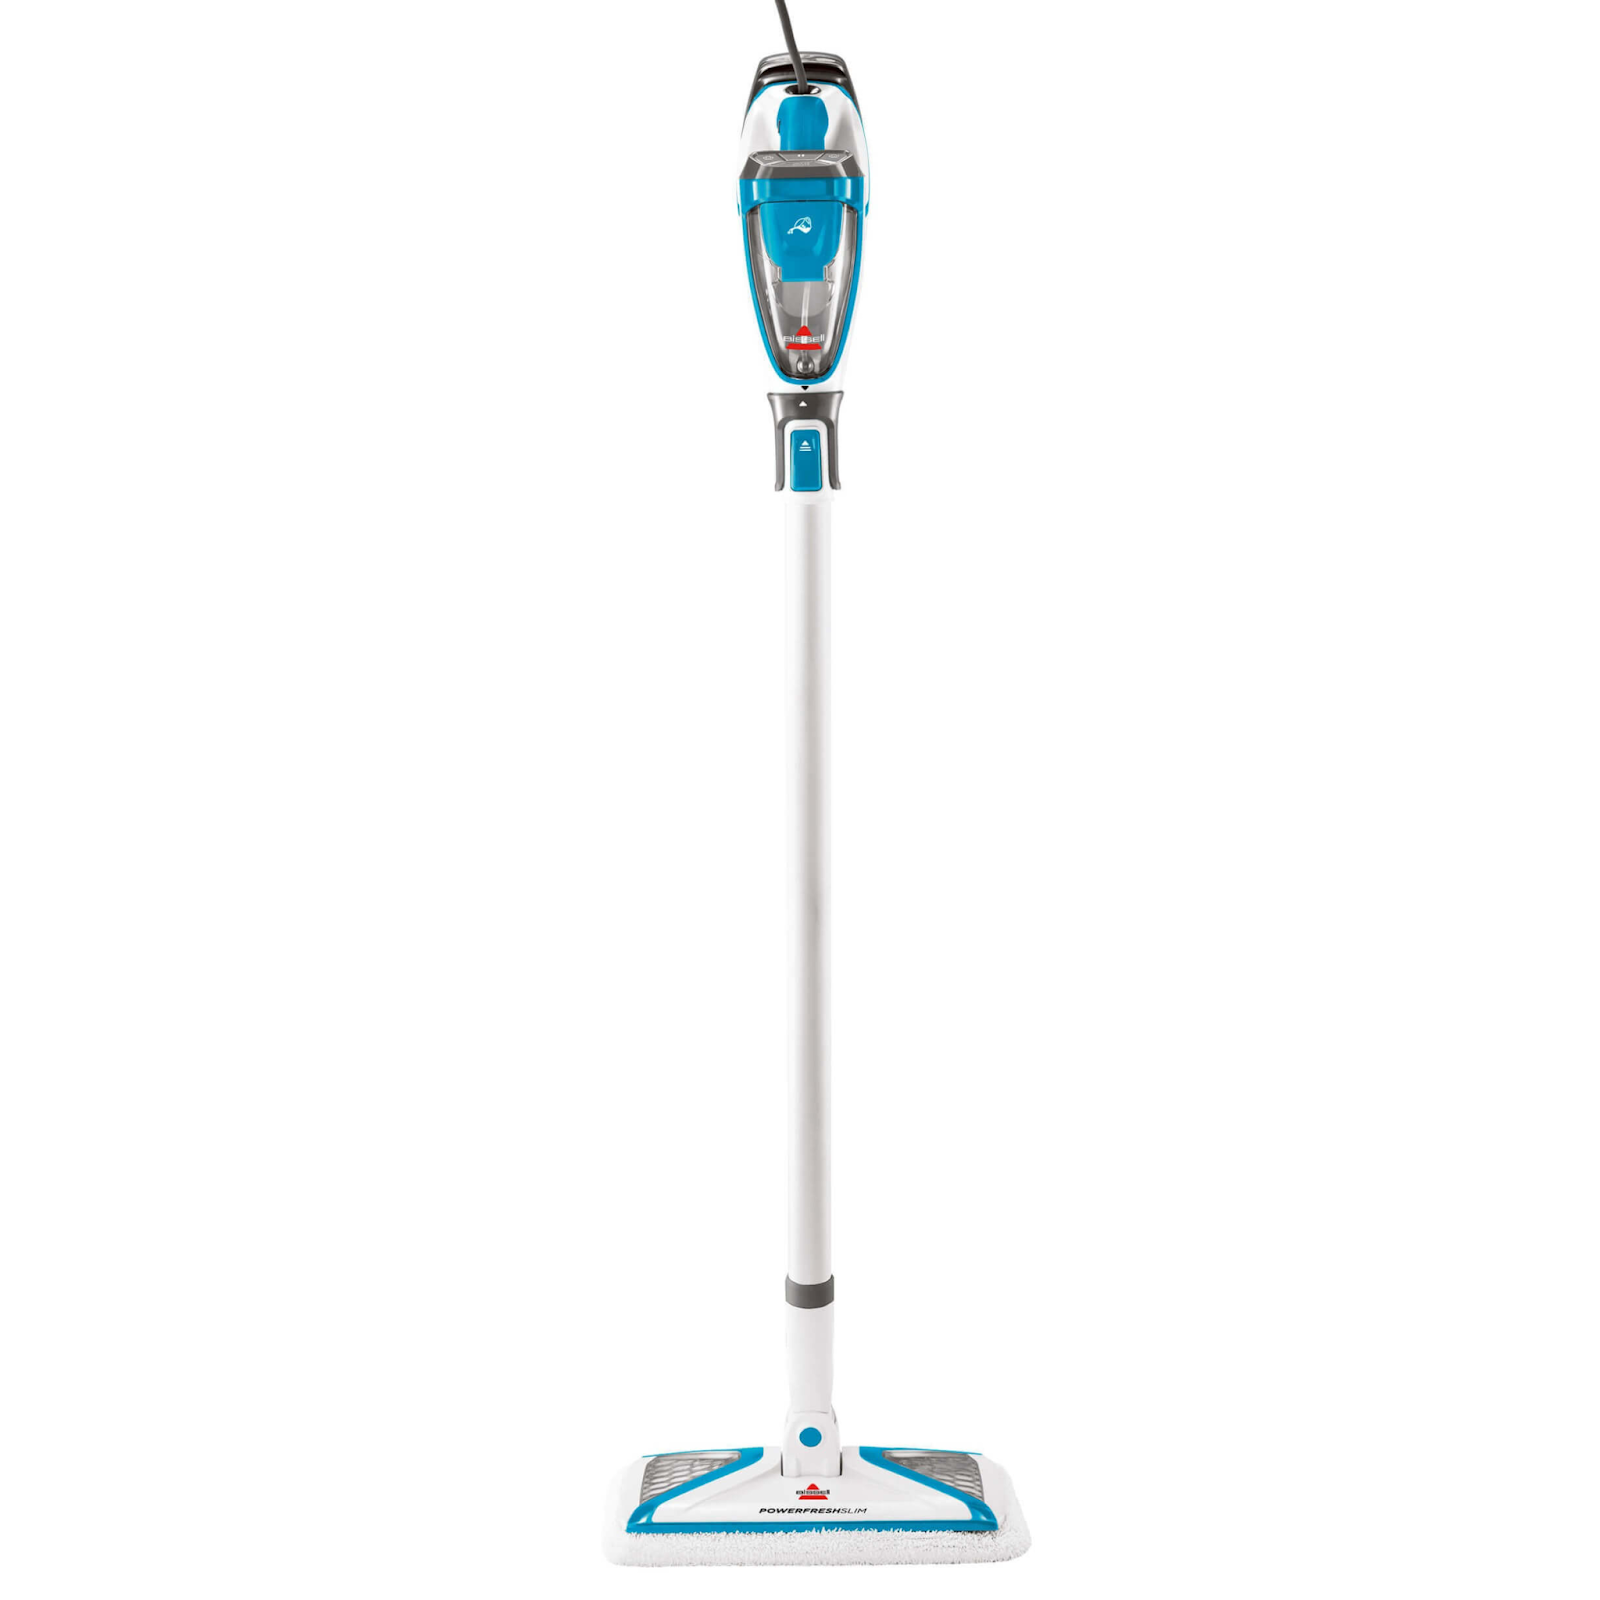 Recommended Vacuum and steam mops brand